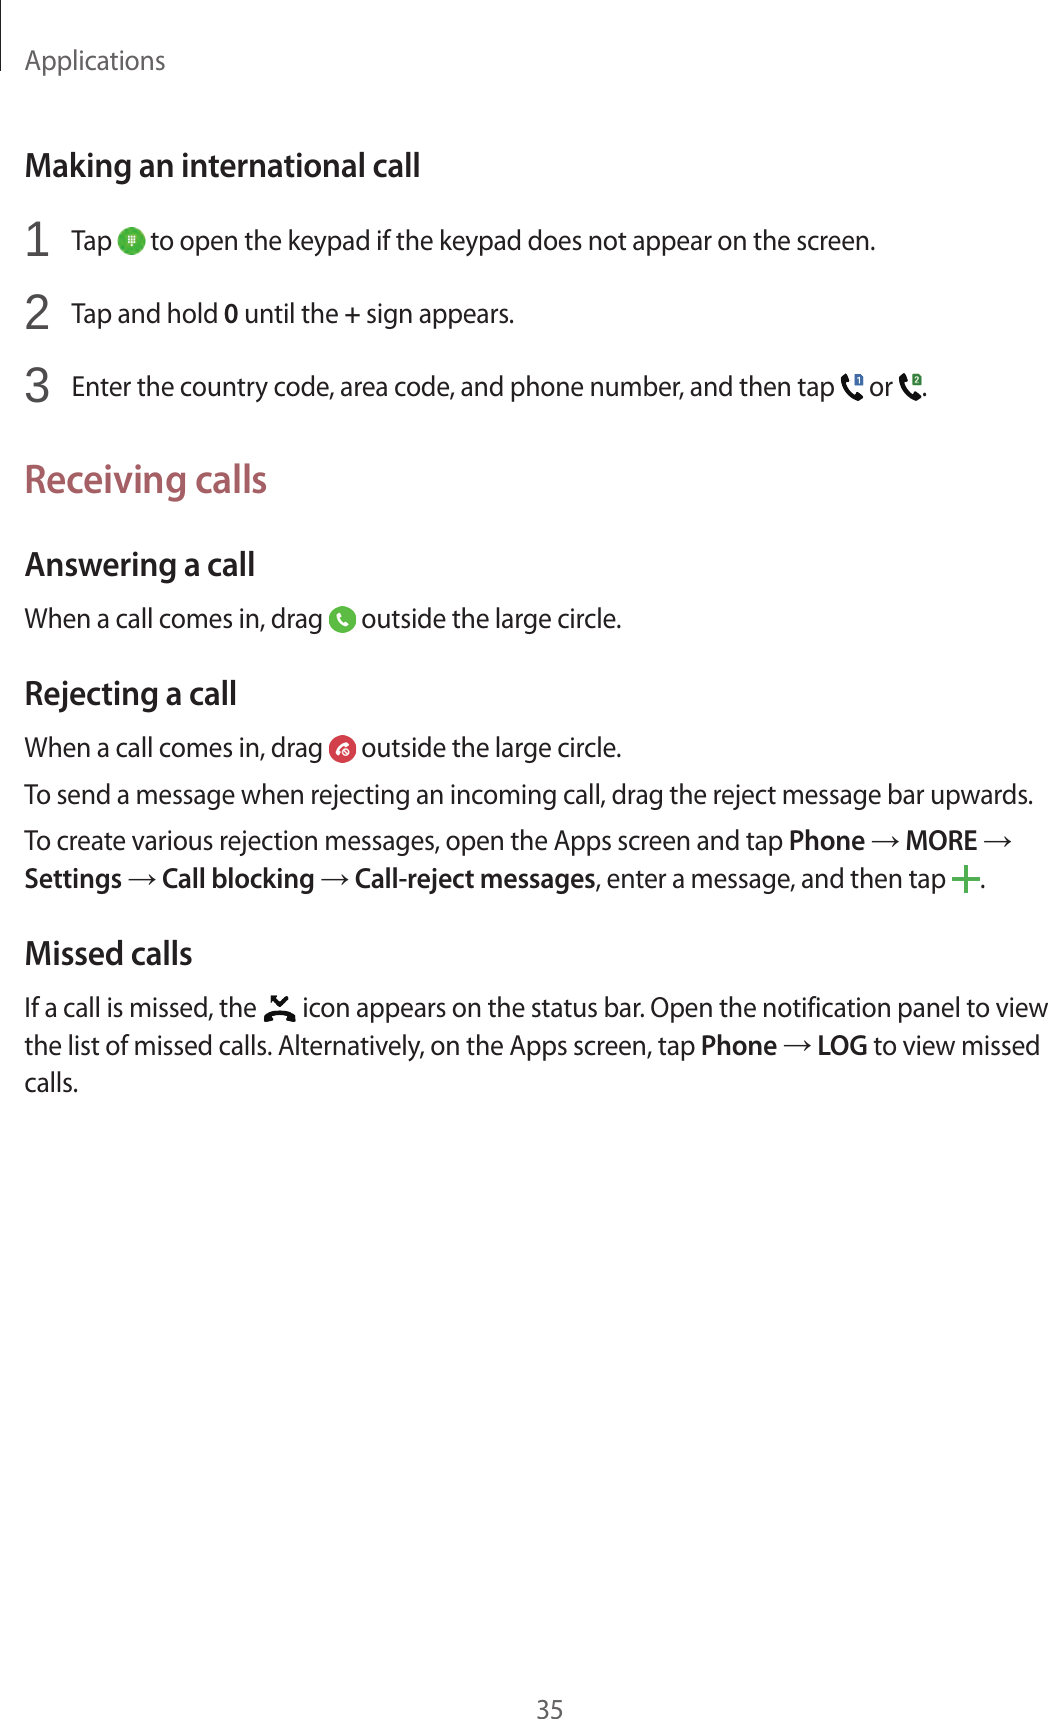 Applications35Making an international call1  Tap   to open the keypad if the keypad does not appear on the screen.2  Tap and hold 0 until the + sign appears.3  Enter the country code, area code, and phone number, and then tap   or  .Receiving callsAnswering a callWhen a call comes in, drag   outside the large circle.Rejecting a callWhen a call comes in, drag   outside the large circle.To send a message when rejecting an incoming call, drag the reject message bar upwards.To create various rejection messages, open the Apps screen and tap Phone → MORE → Settings → Call blocking → Call-reject messages, enter a message, and then tap  .Missed callsIf a call is missed, the   icon appears on the status bar. Open the notification panel to view the list of missed calls. Alternatively, on the Apps screen, tap Phone → LOG to view missed calls.